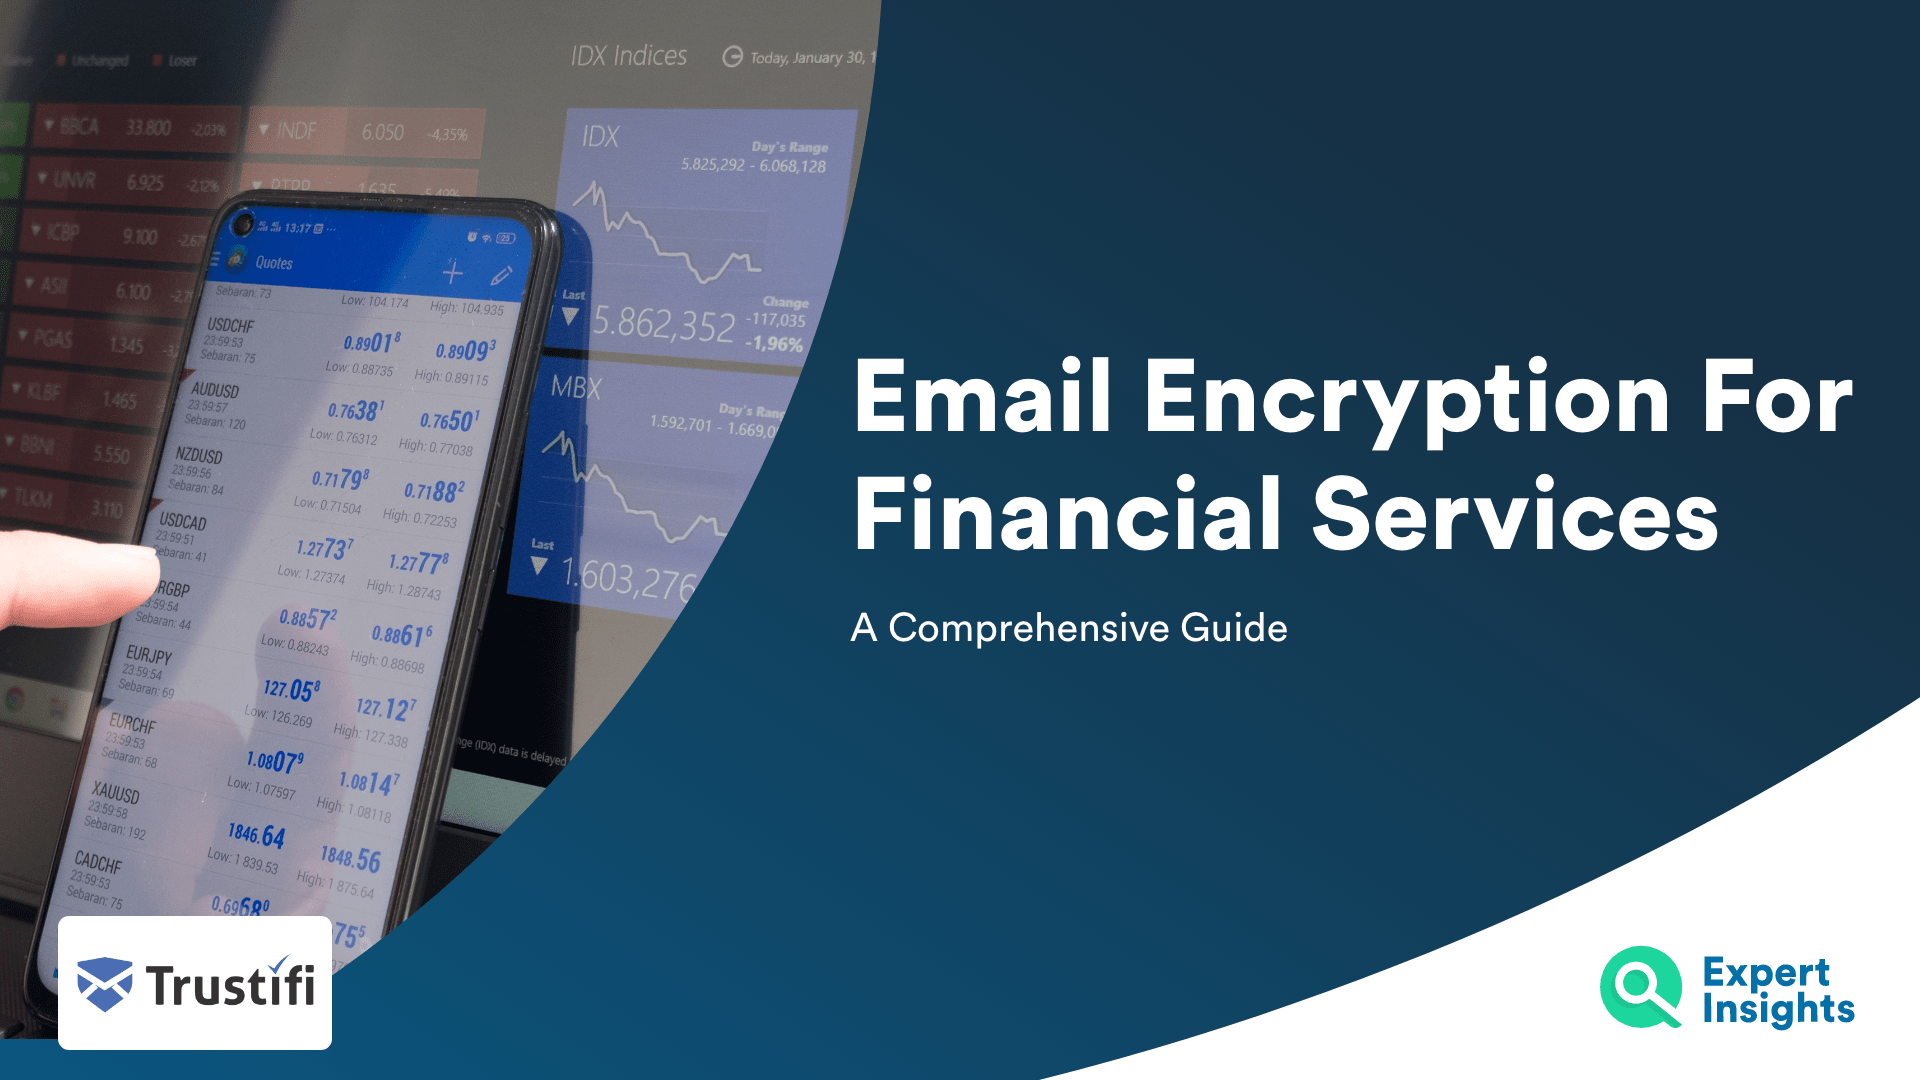 Email Encryption: A Comprehensive Guide For Financial Services - Expert Insights